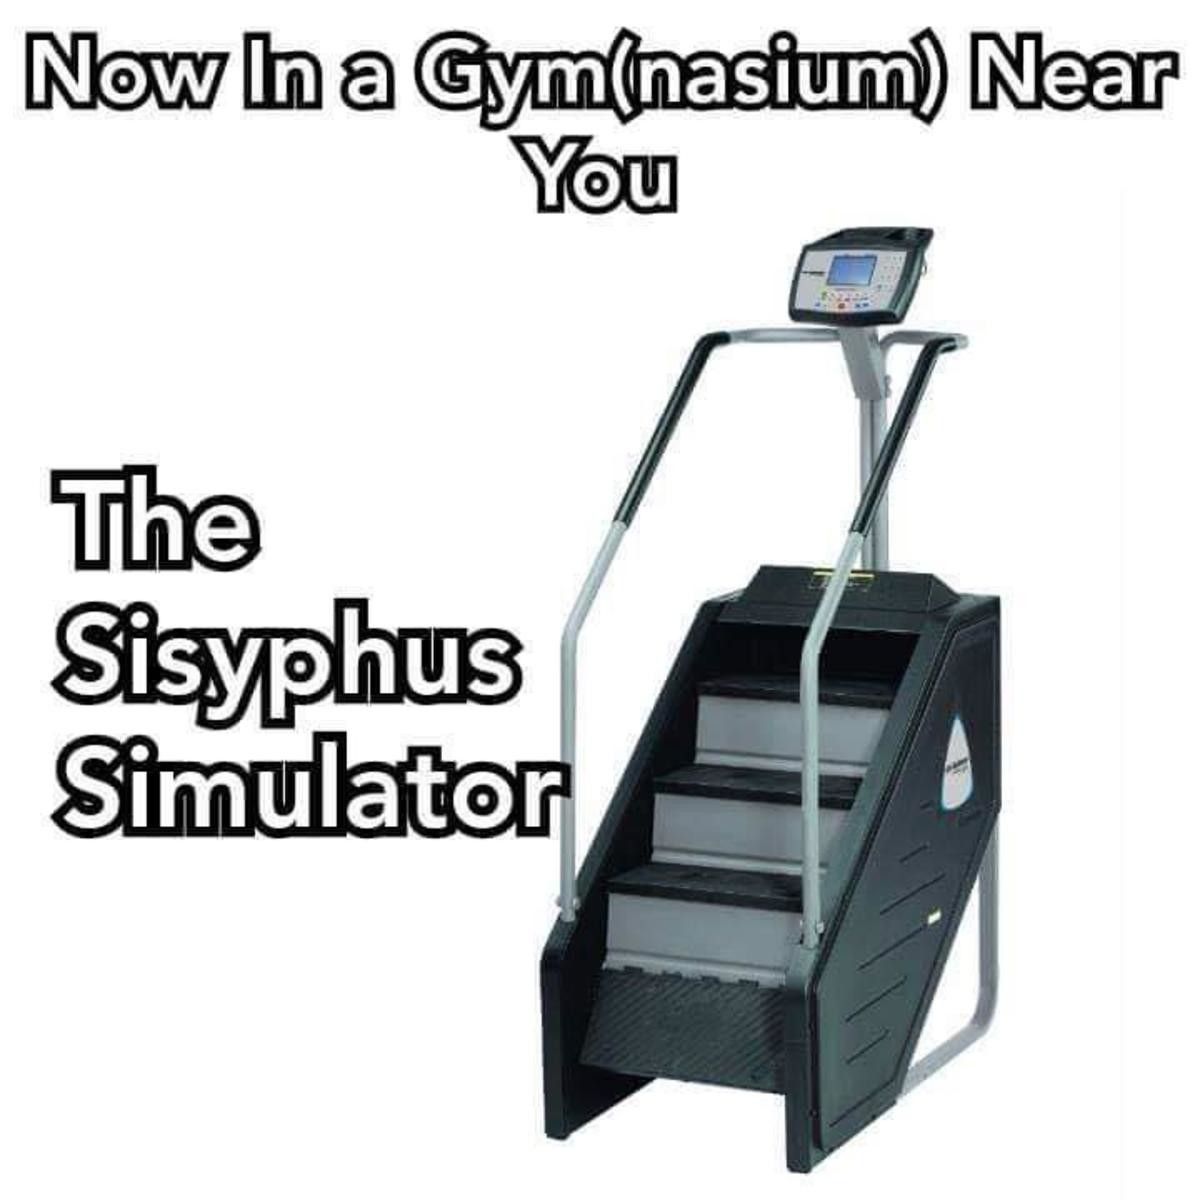 One can imagine Sisyphus happy by simply added air conditioning